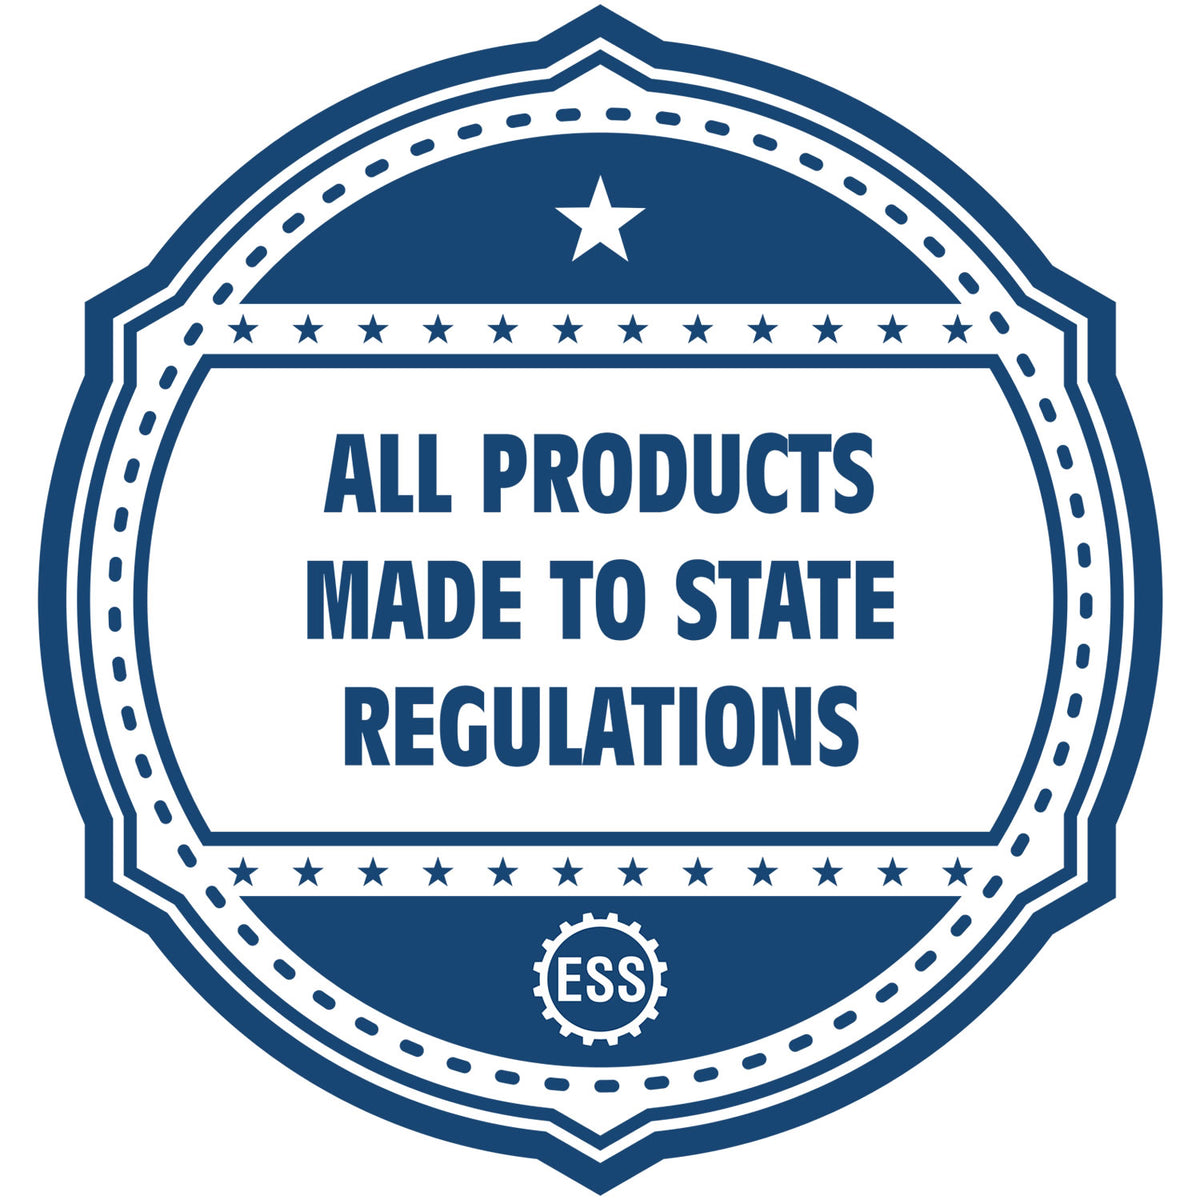 An icon or badge element for the Slim Pre-Inked New Mexico Architect Seal Stamp showing that this product is made in compliance with state regulations.